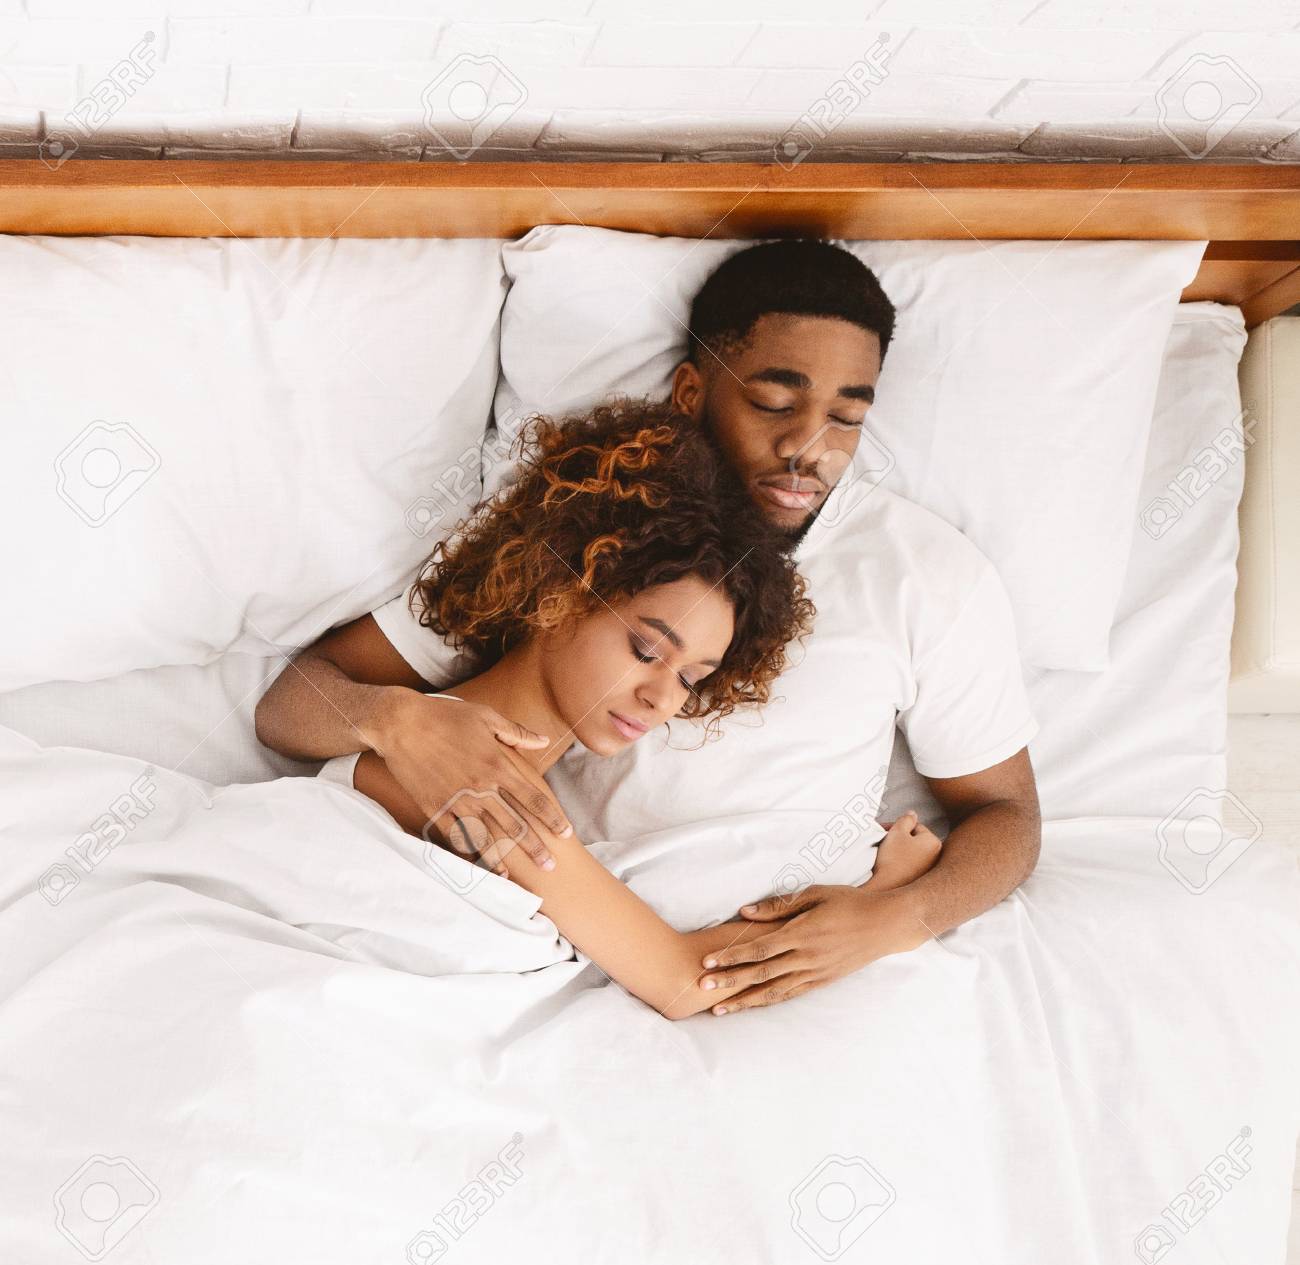 dominique fitzgerald recommends cuddling in bed pictures pic